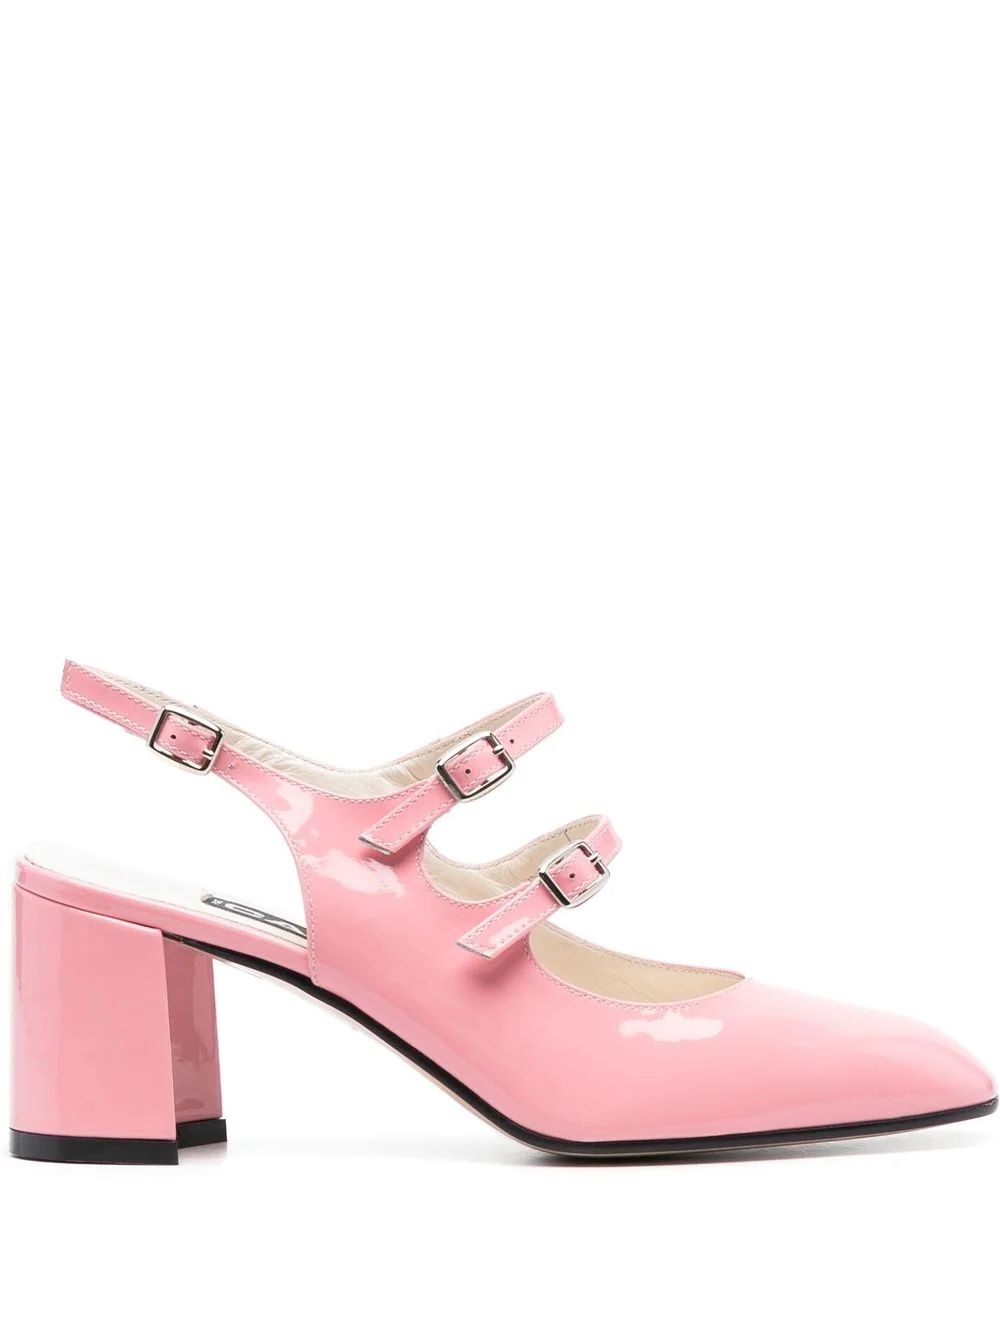 Banana patent-leather buckled pumps | Farfetch Global